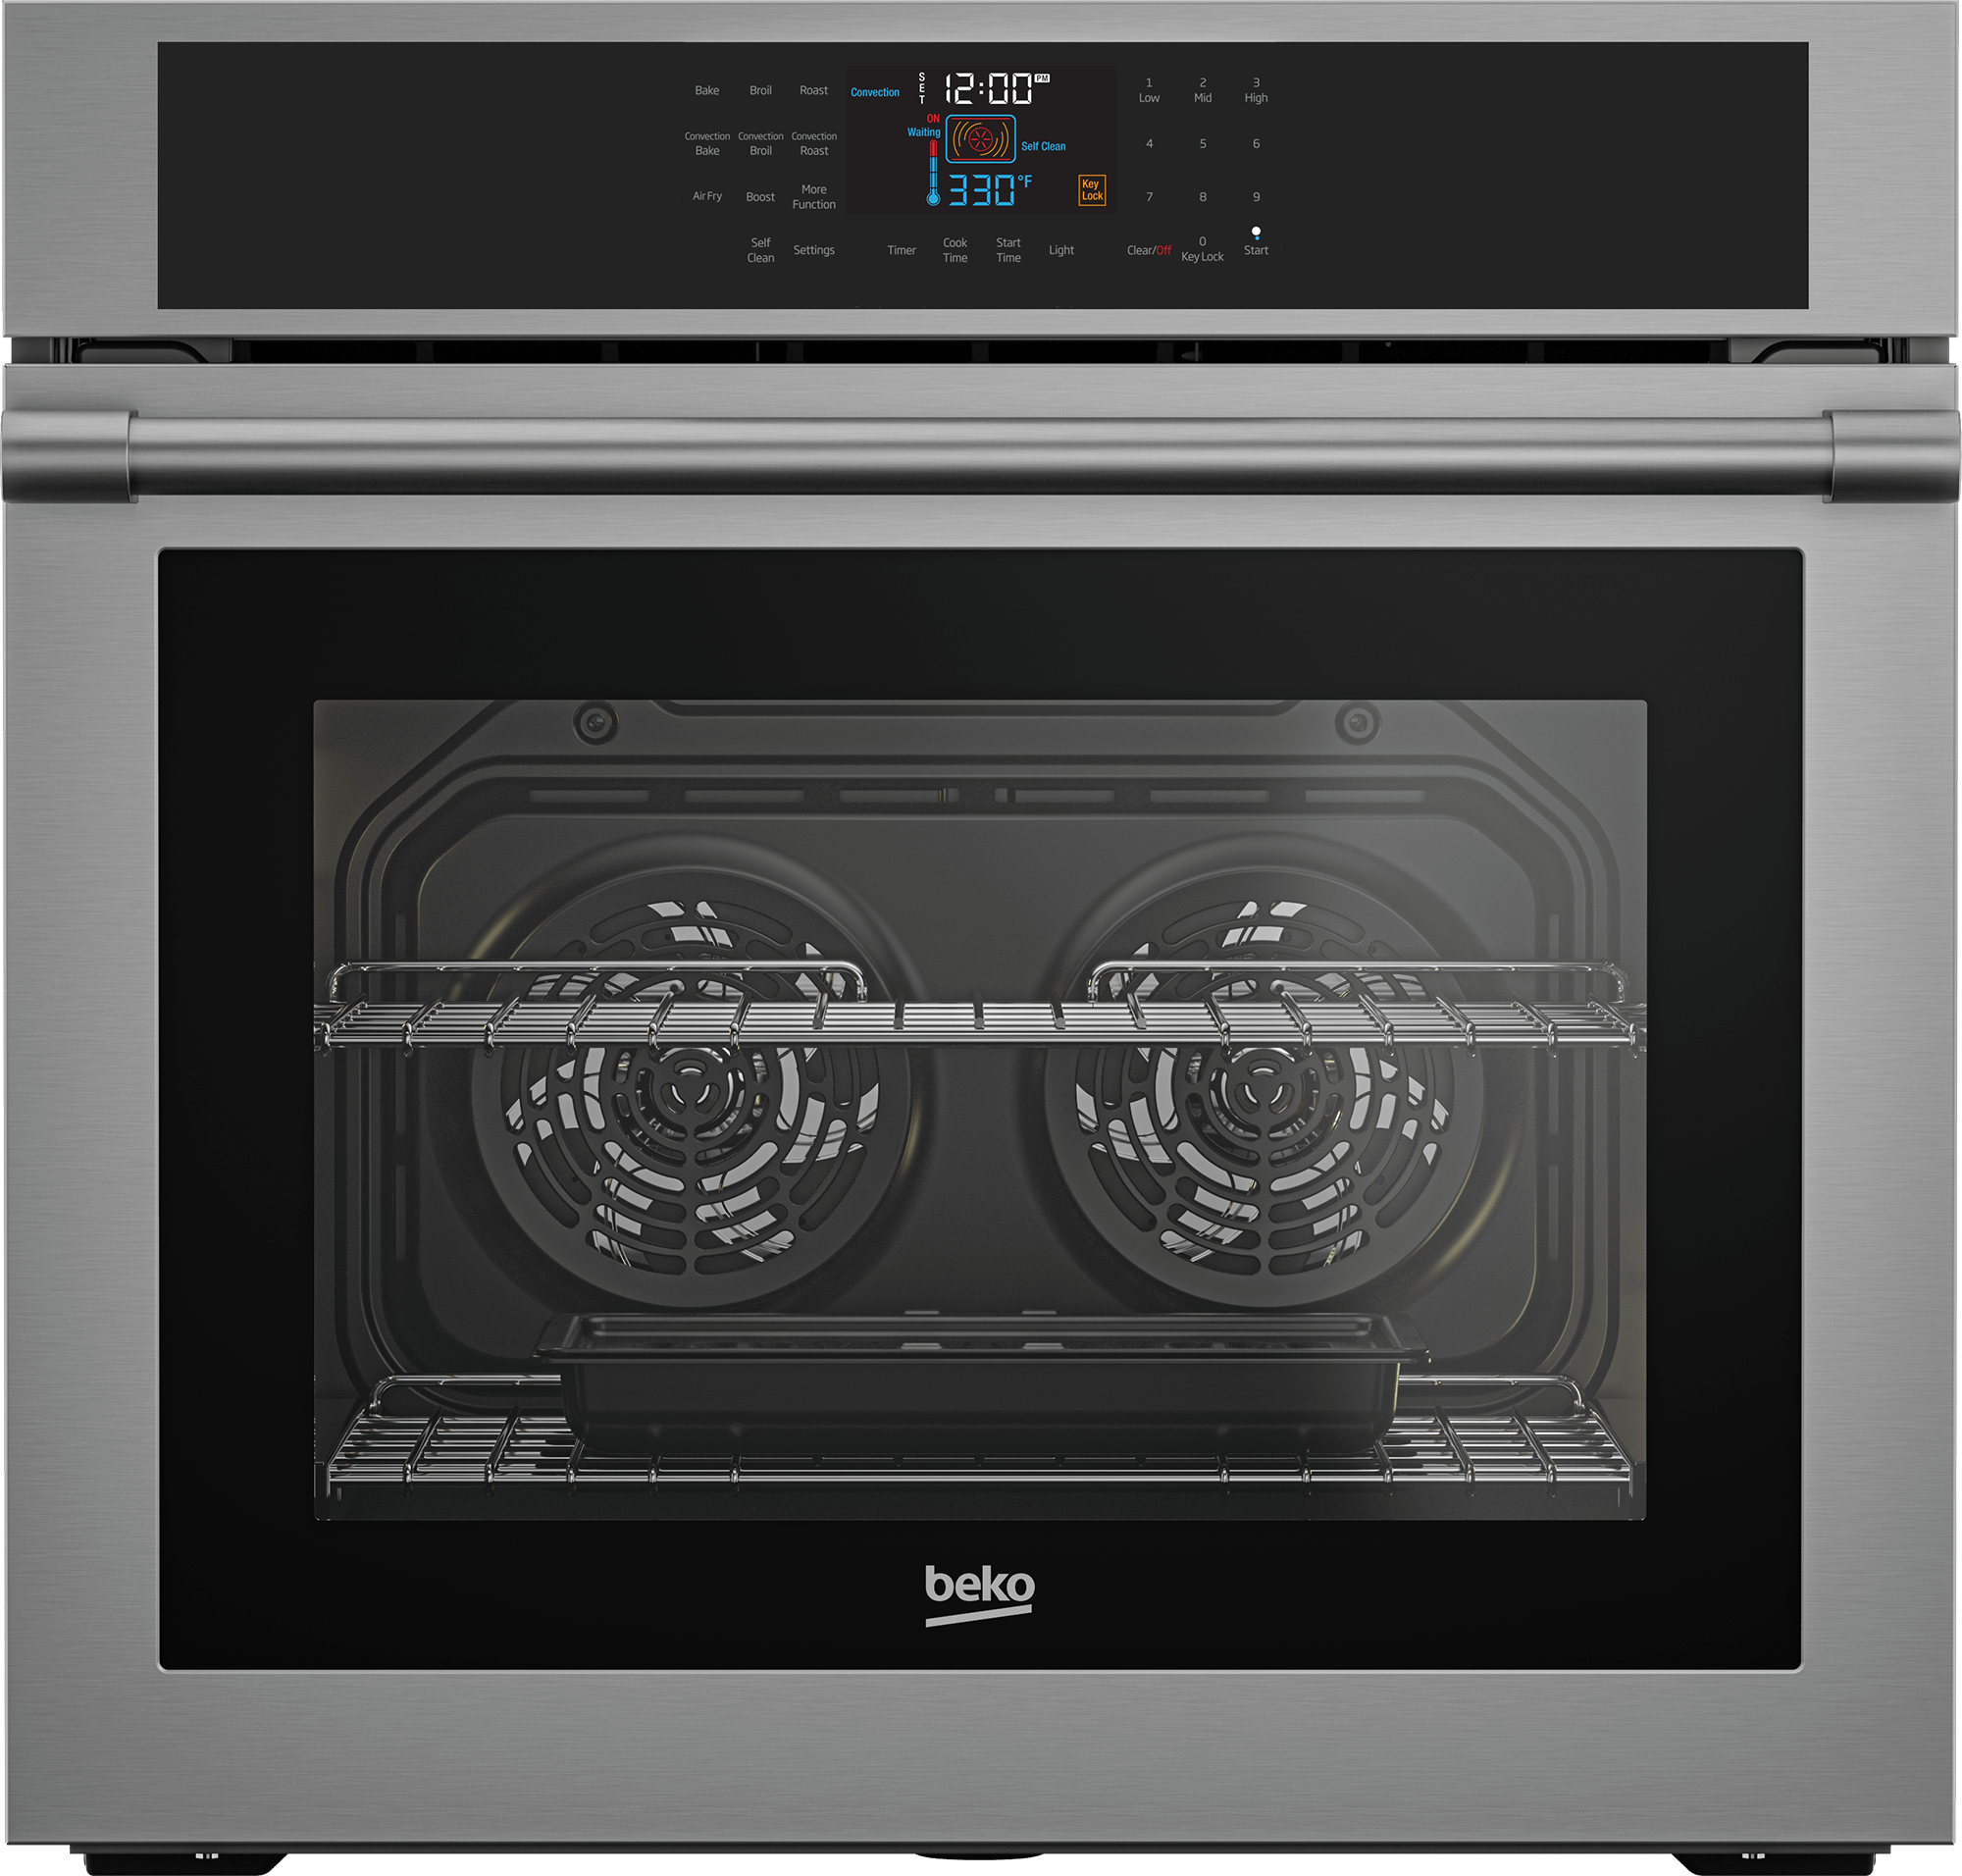 Beko 30" Stainless steel Wall Oven